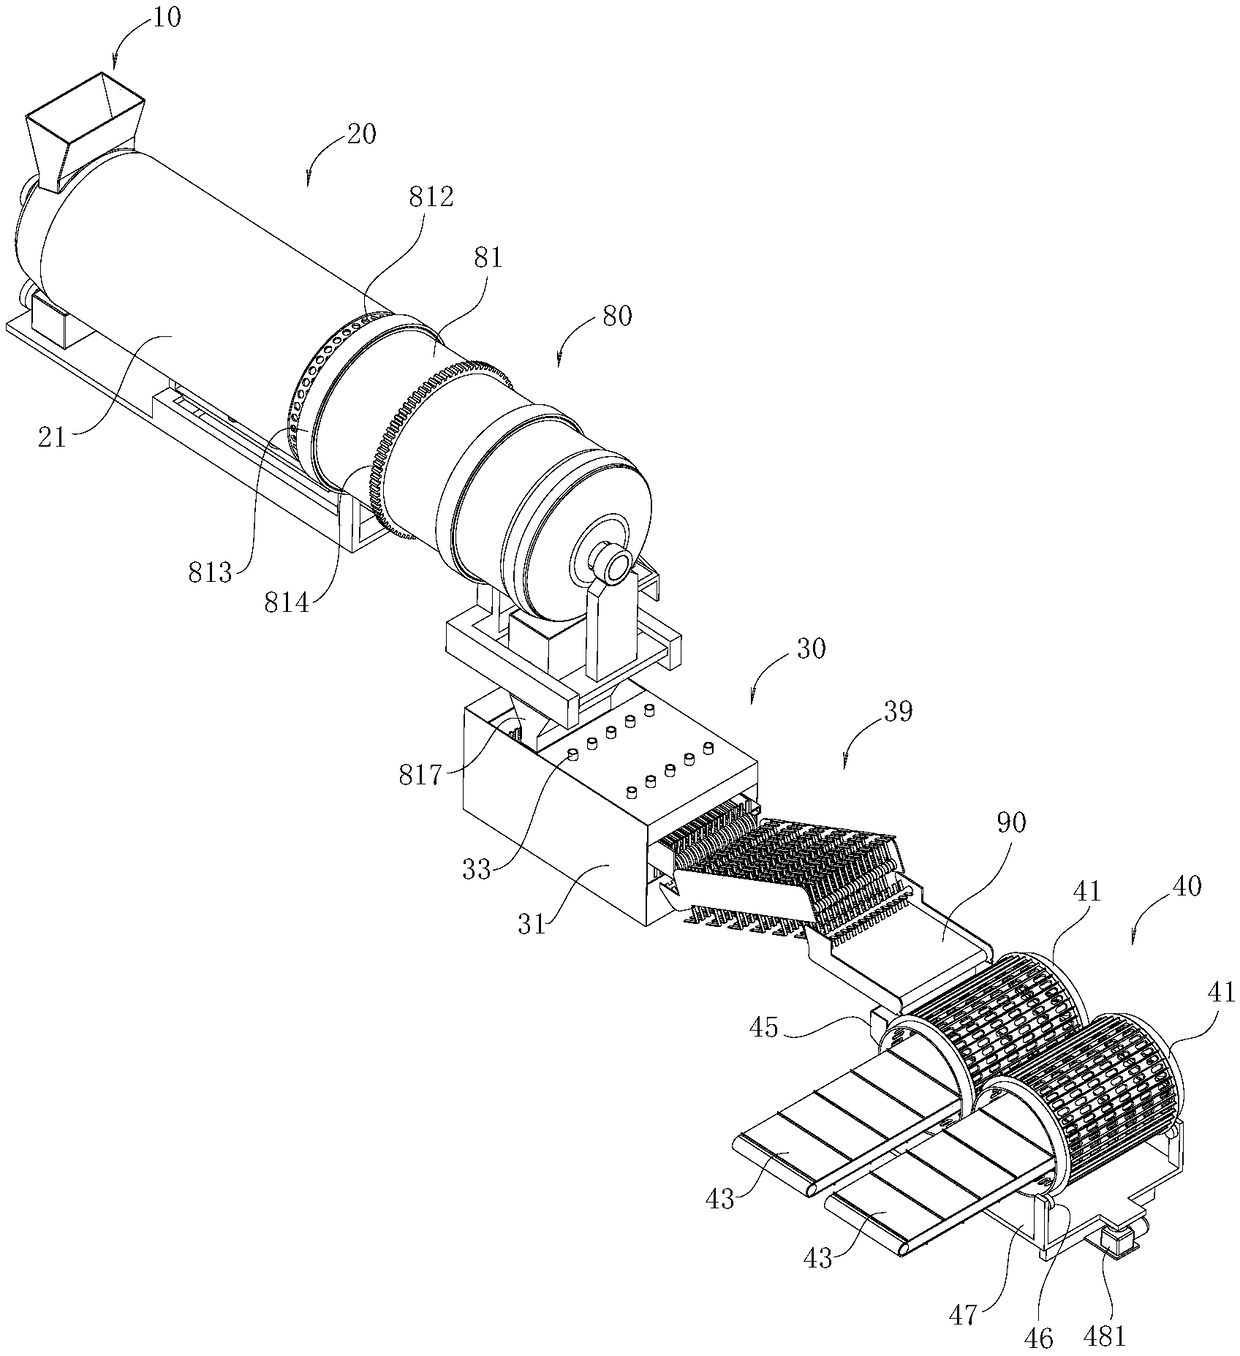 Hair removing device